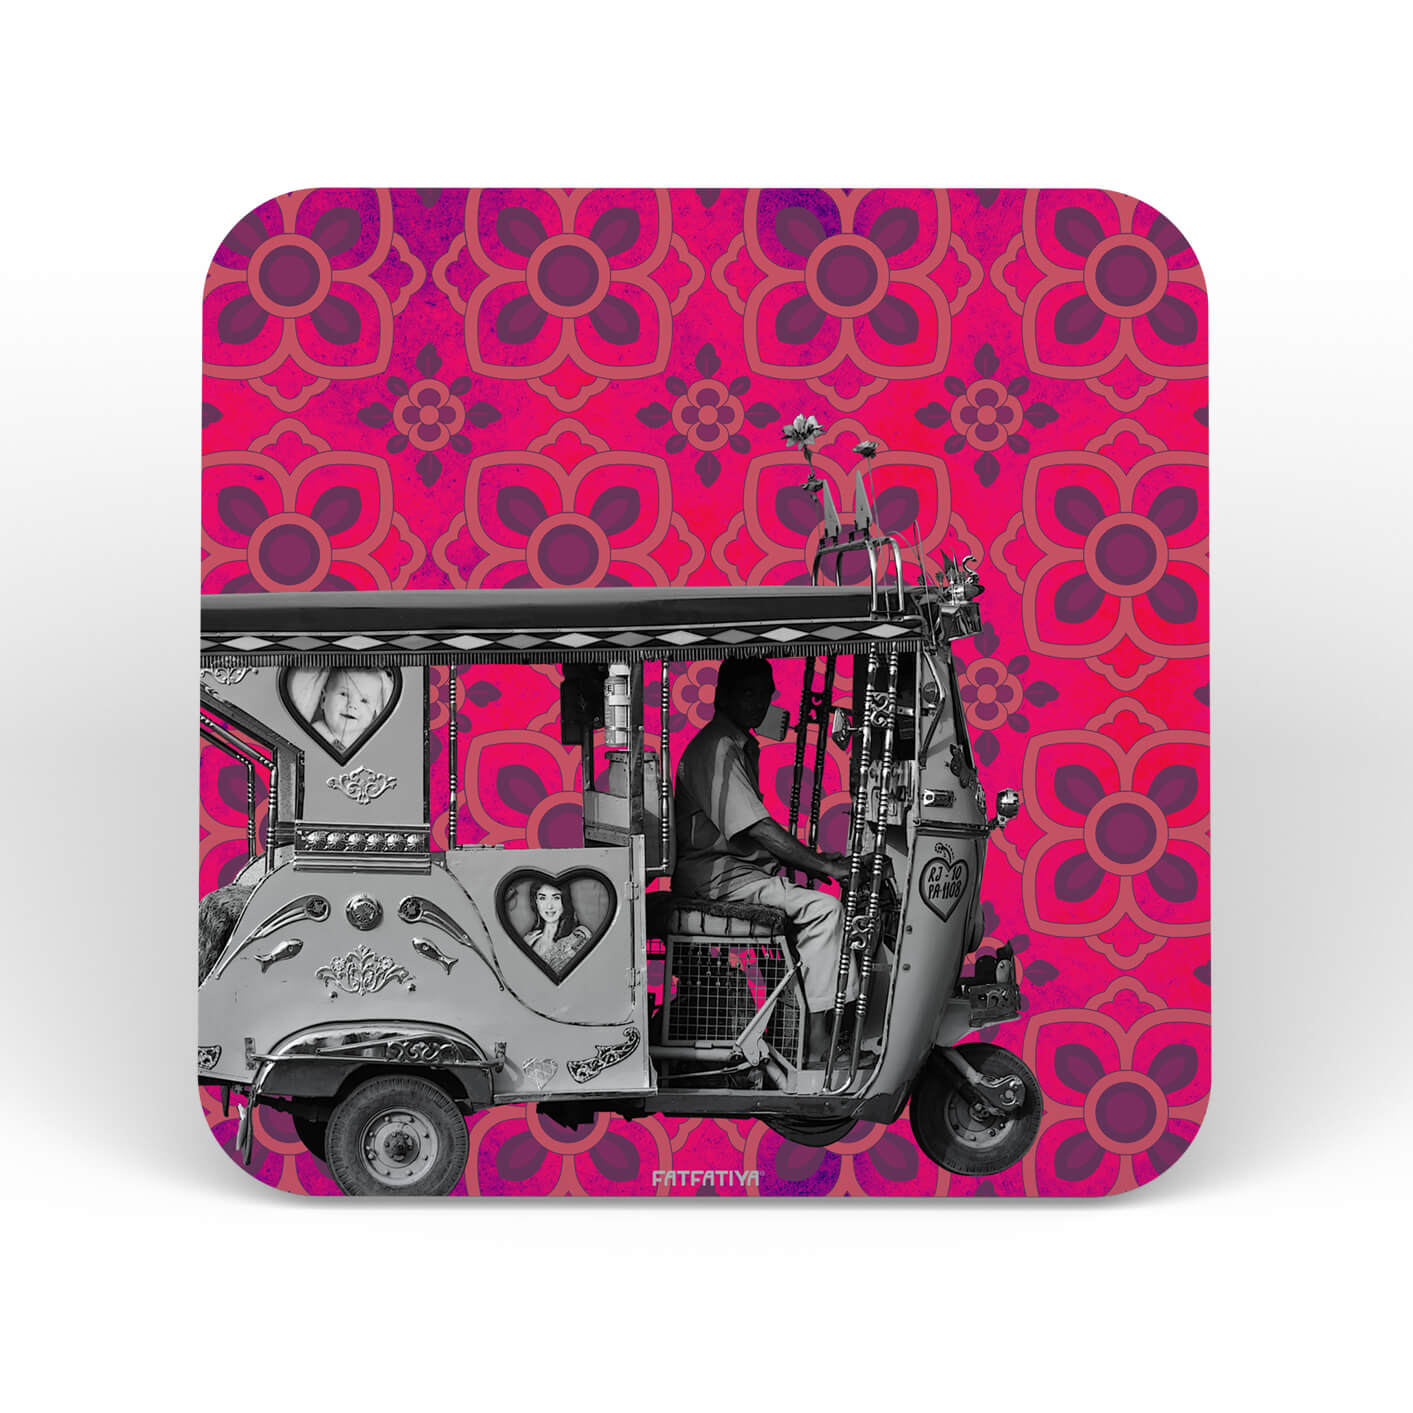 Buy Quirky Printed Table & Tea Coasters Online